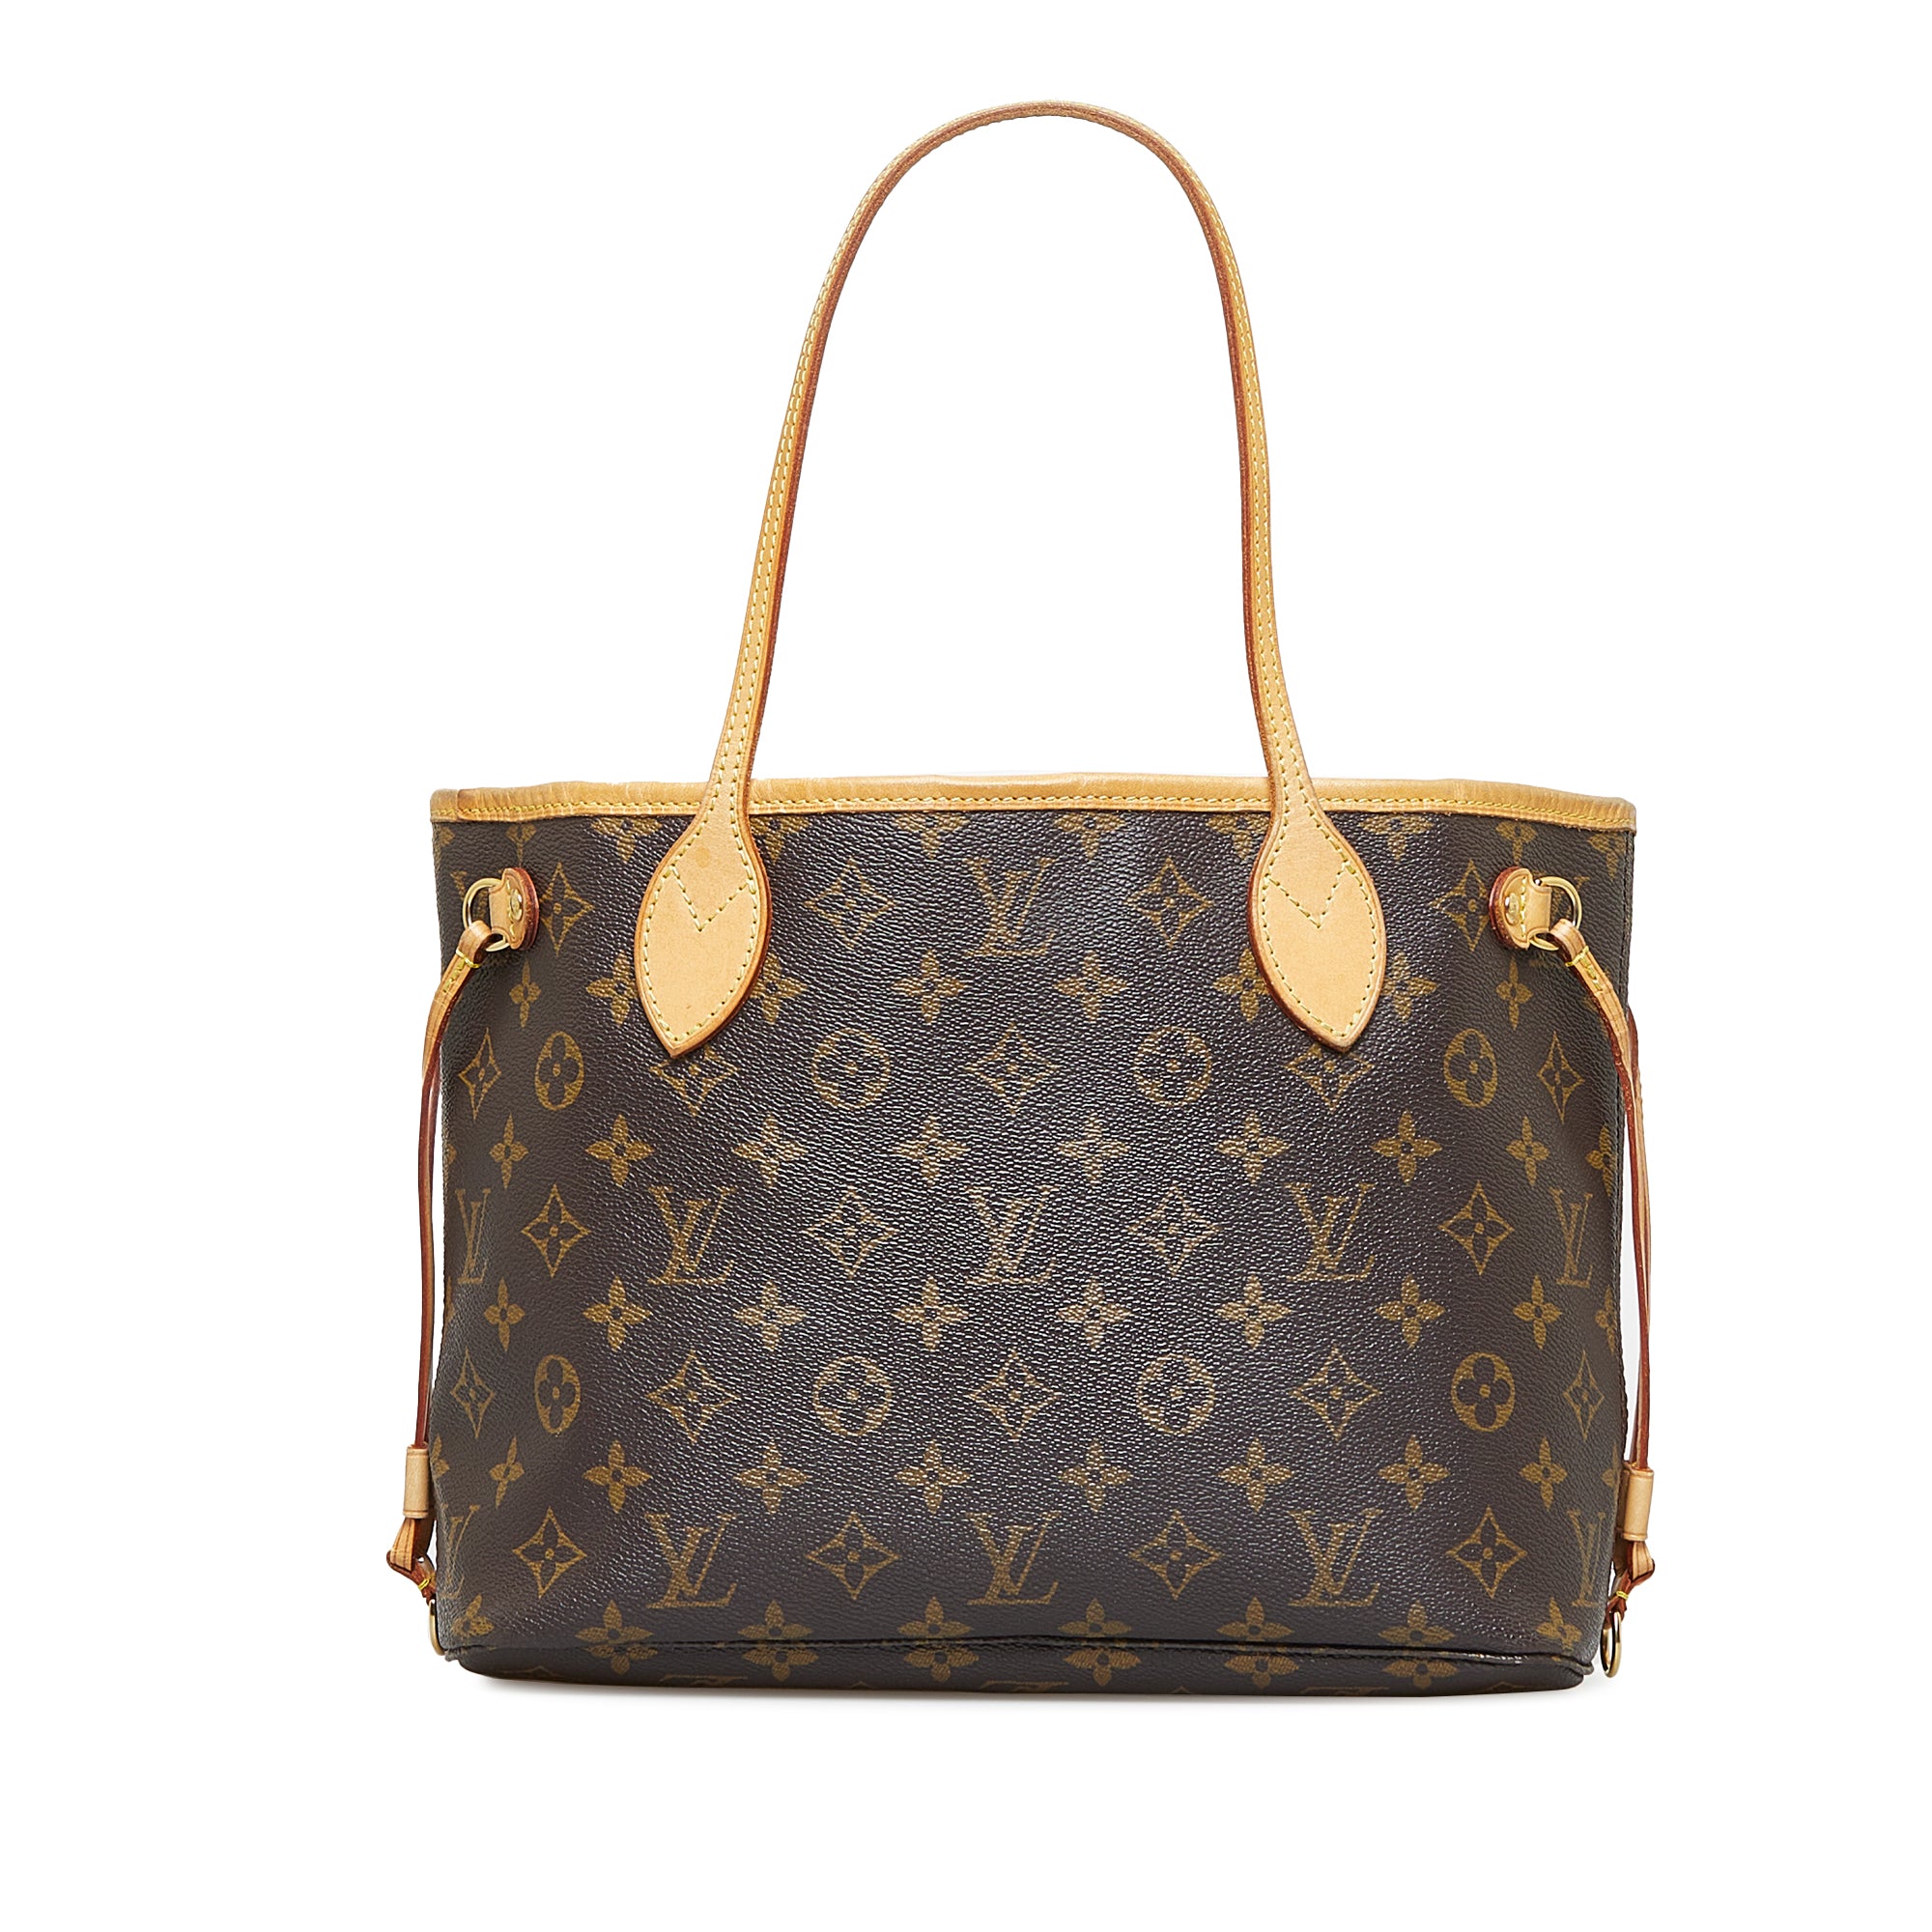 Louis Vuitton Monogram Neverfull Pm Canvas Tote Bag (pre-owned) in Brown